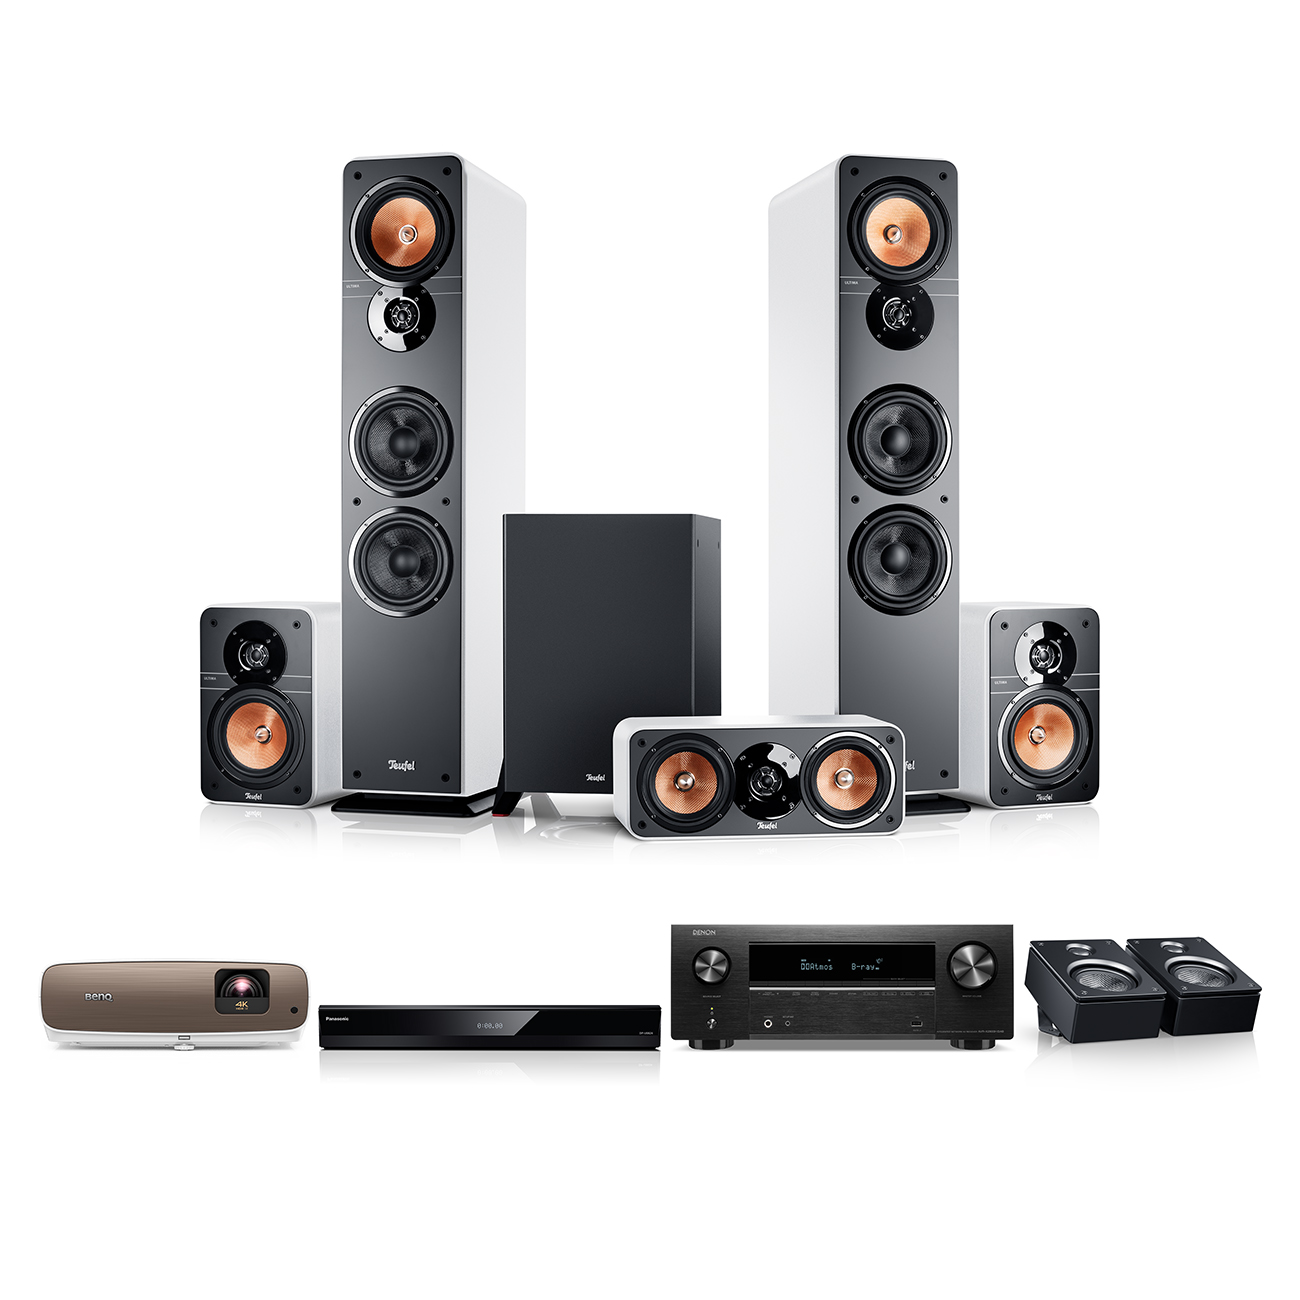 ULTIMA 40 Surround All-In Edition "5.1.2-Set"